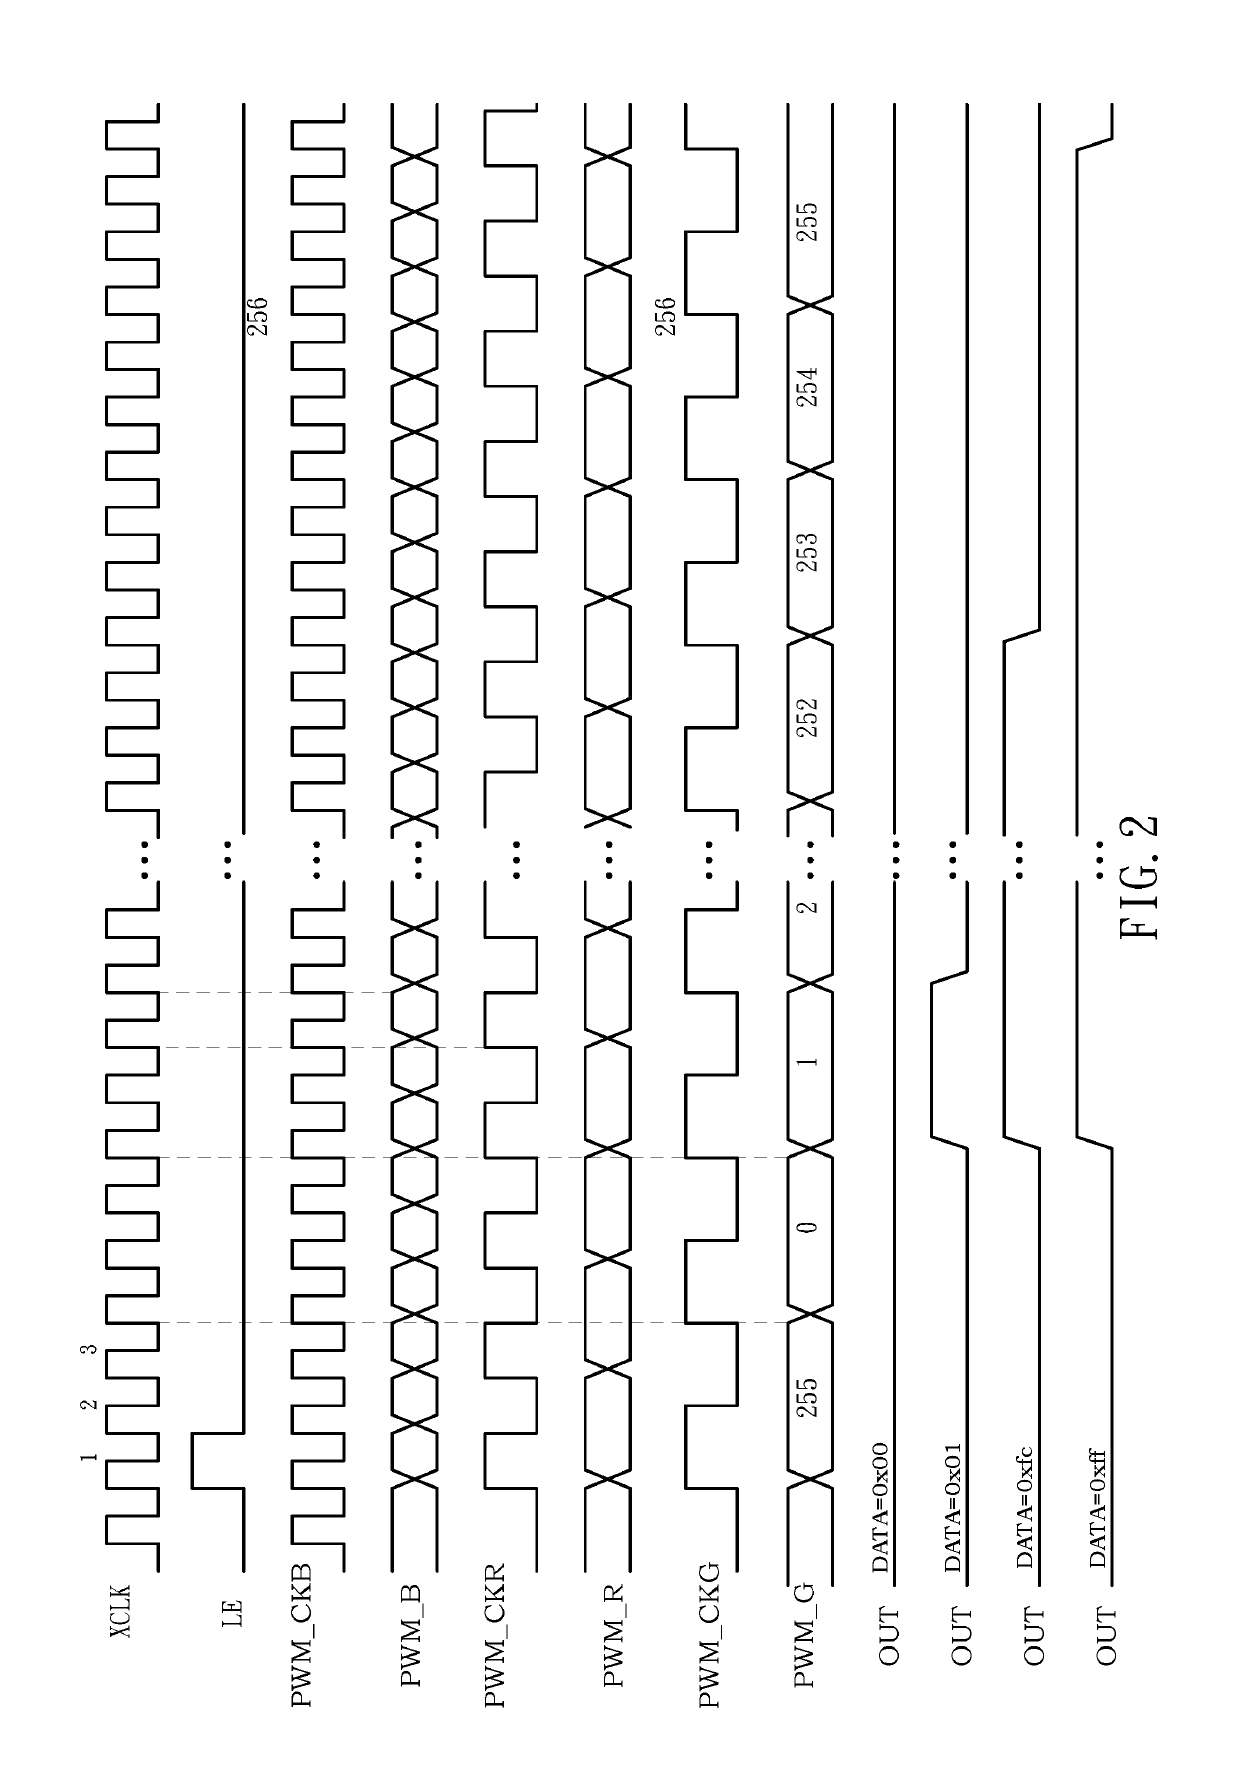 Data driver of a microLED display